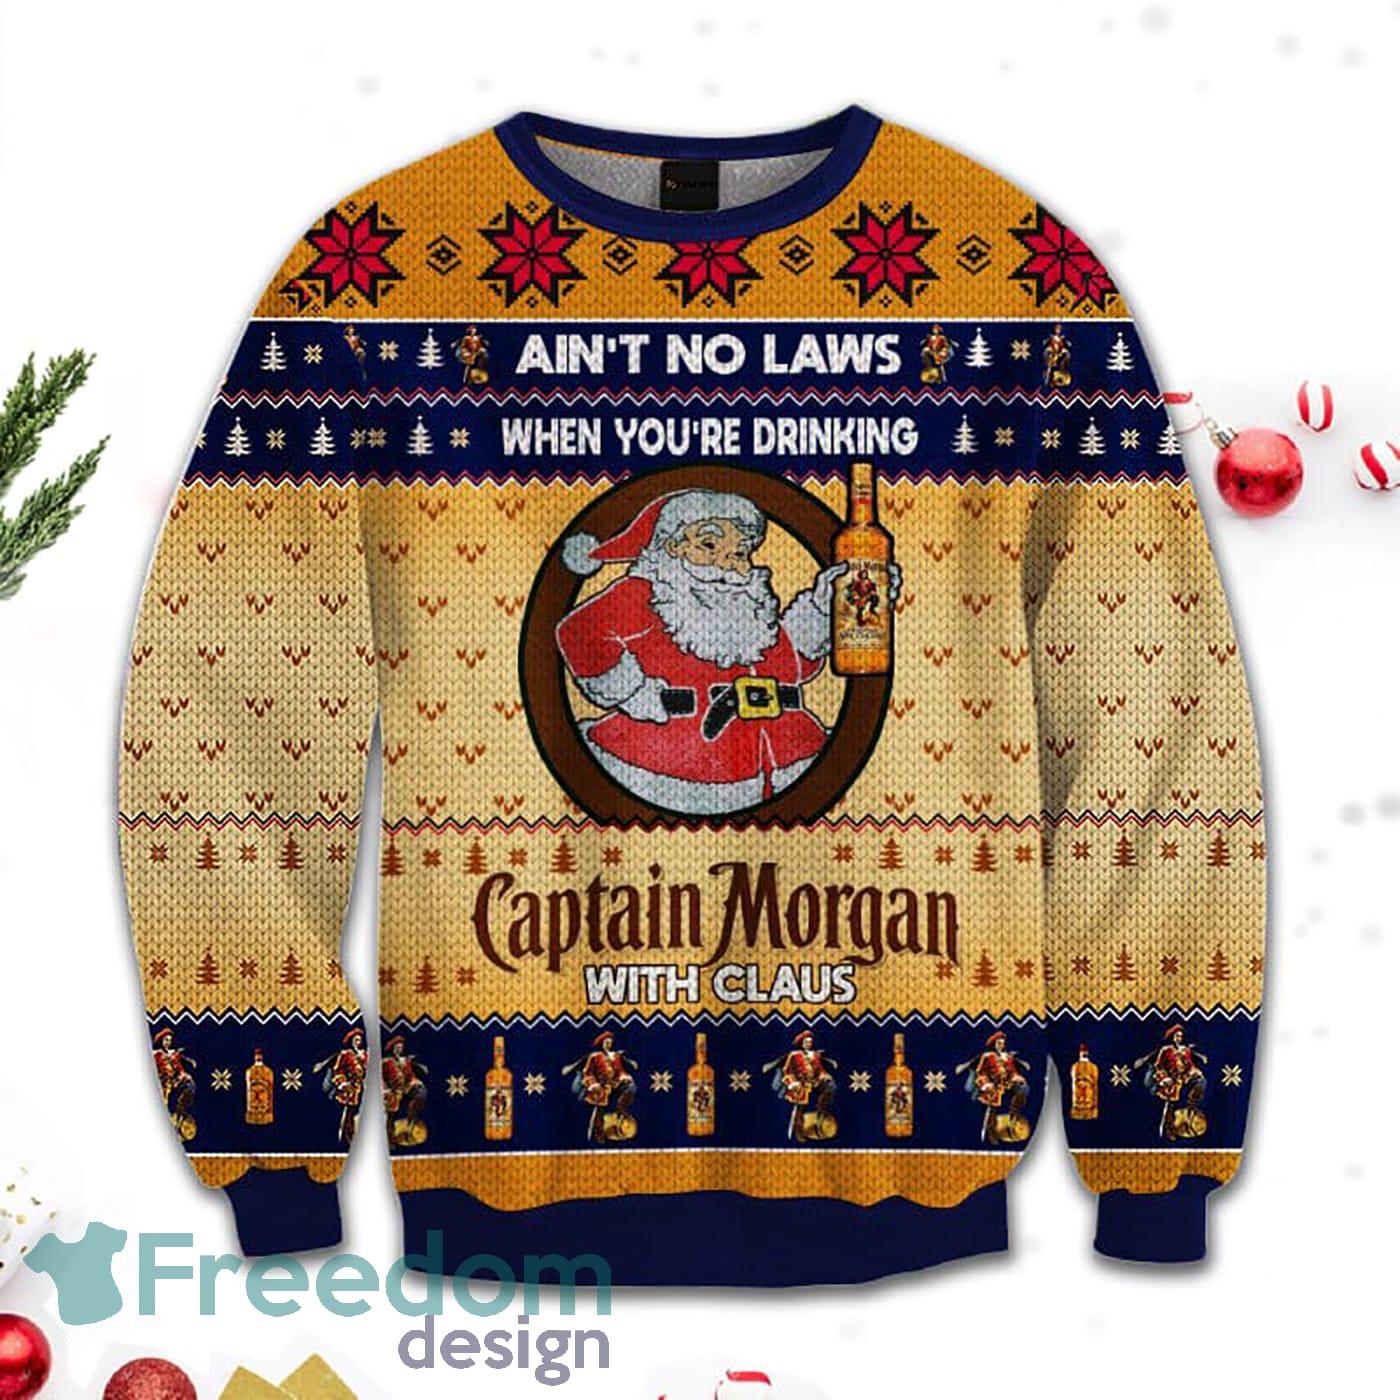 Merr Christmas Ain't No Laws When You Drink Captain Morgan With Claus Sweatshirt